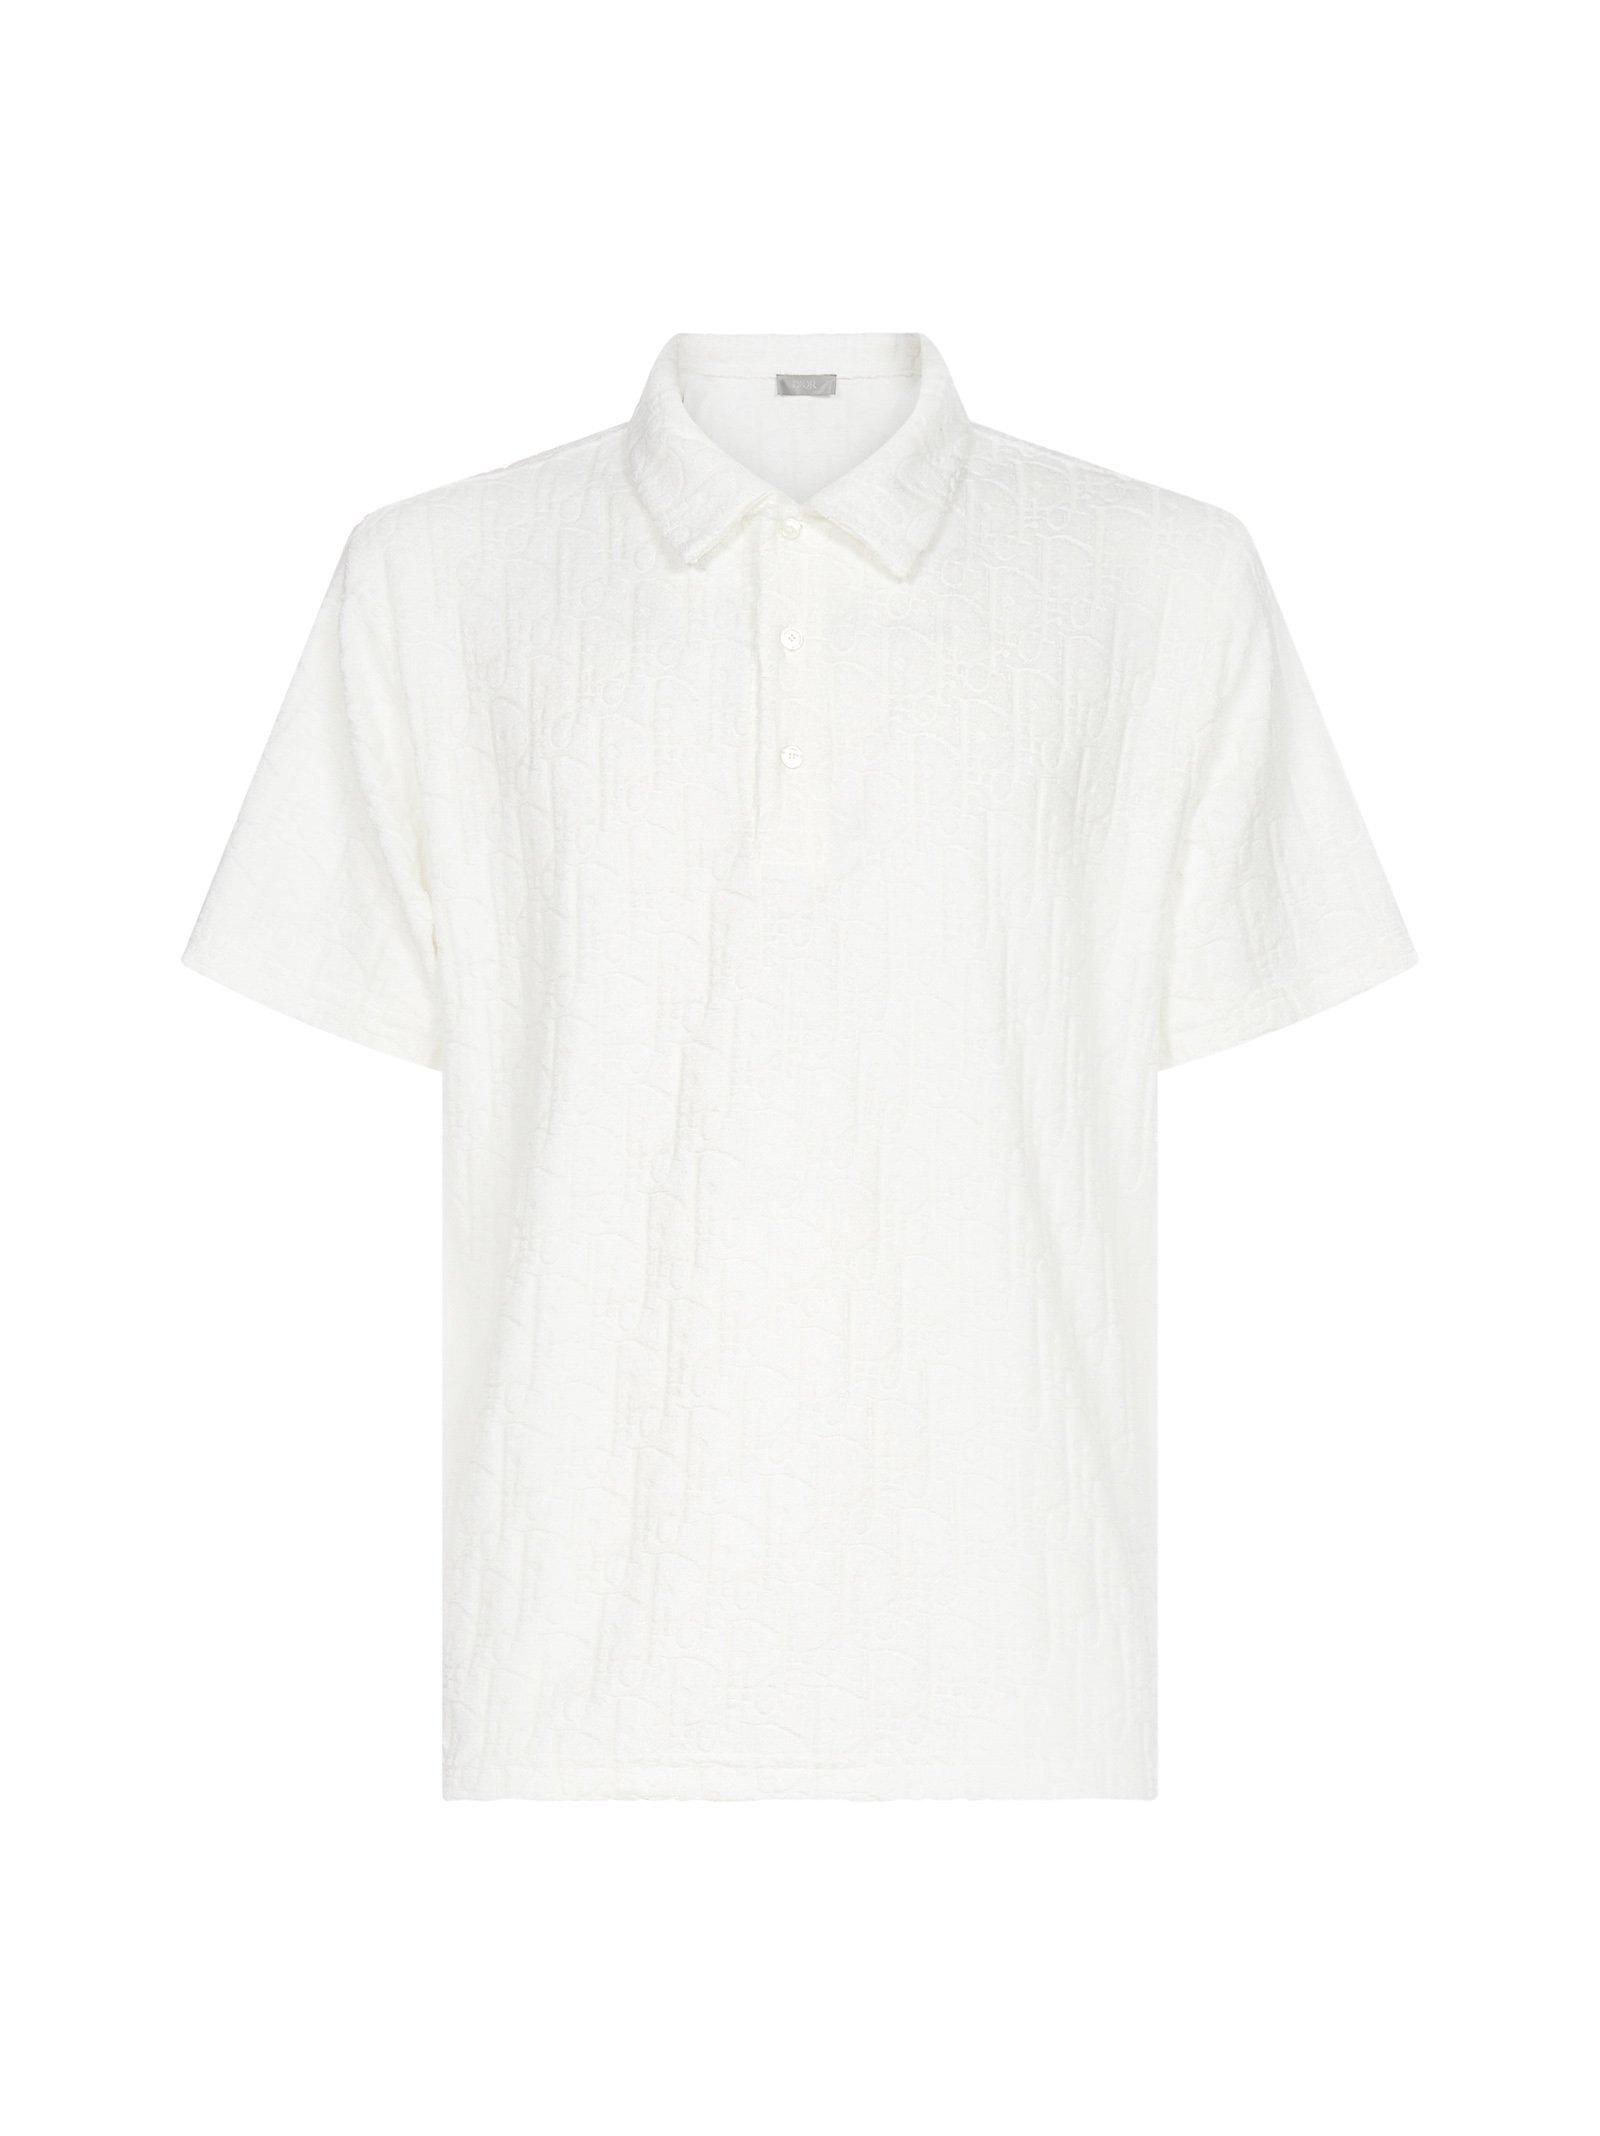 Christian Dior Dior Oblique Mens T-Shirts, White, Please Contact US for Consultation.